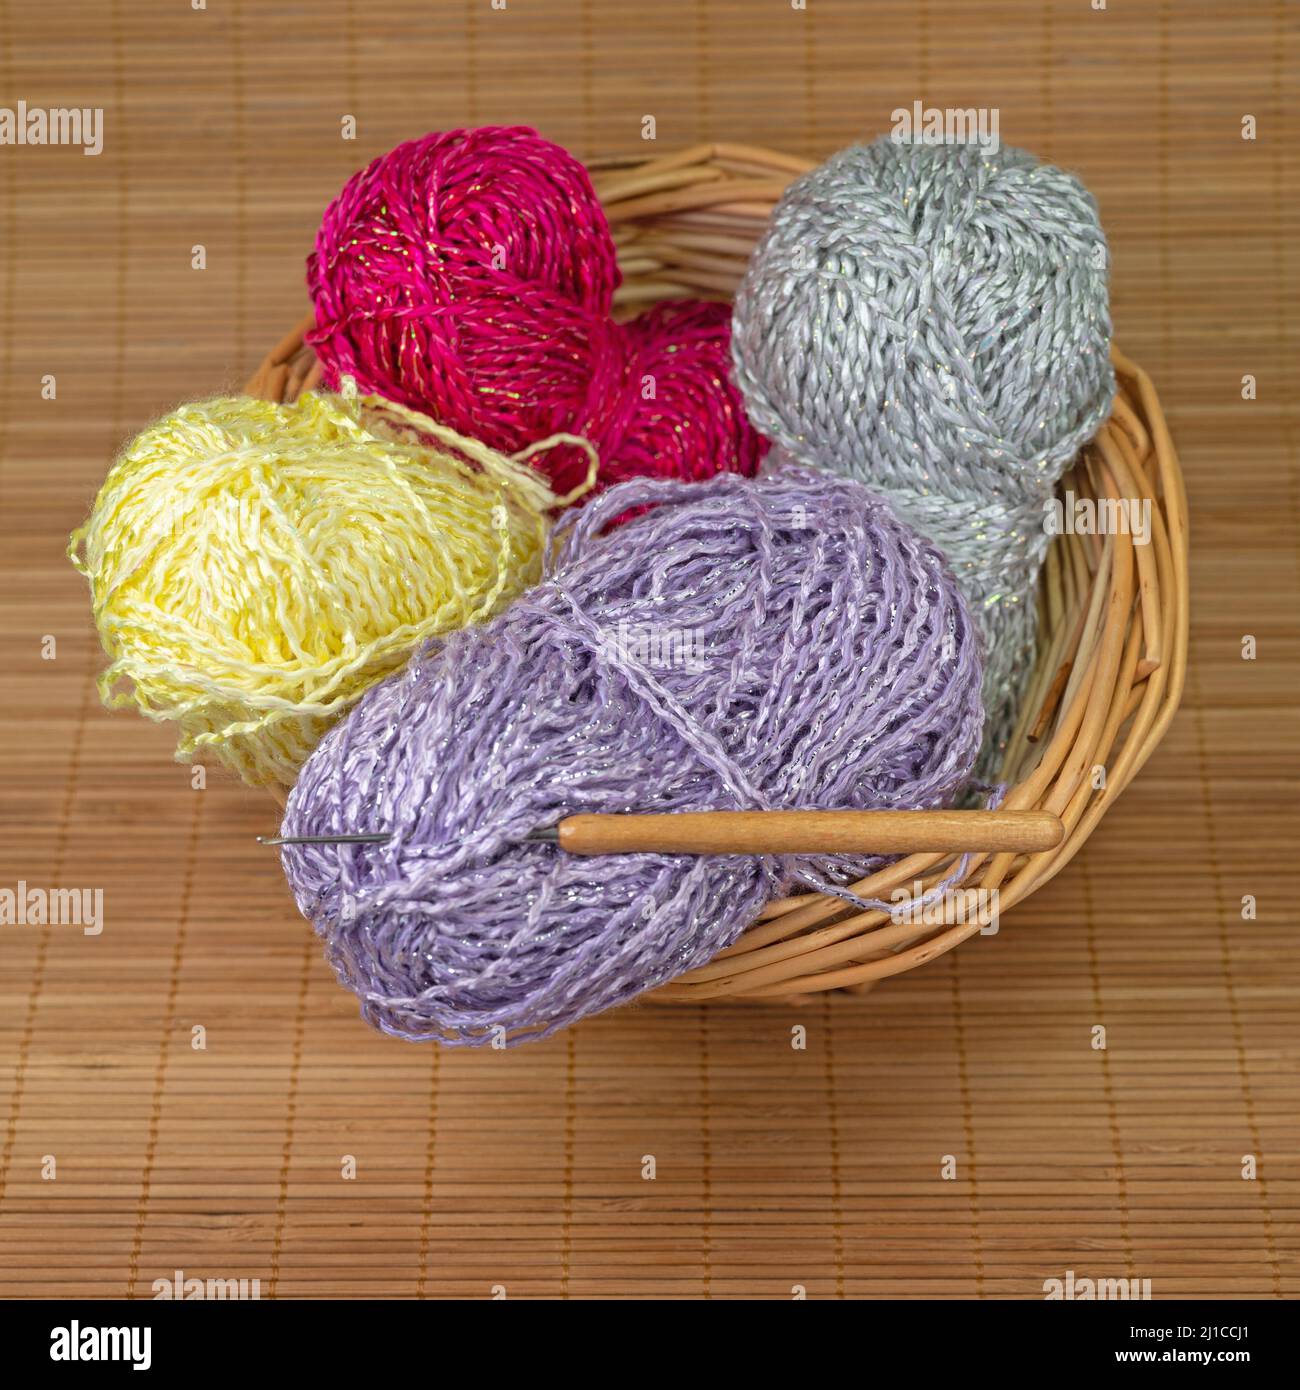 Colorful crochet yarns in a basket Stock Photo